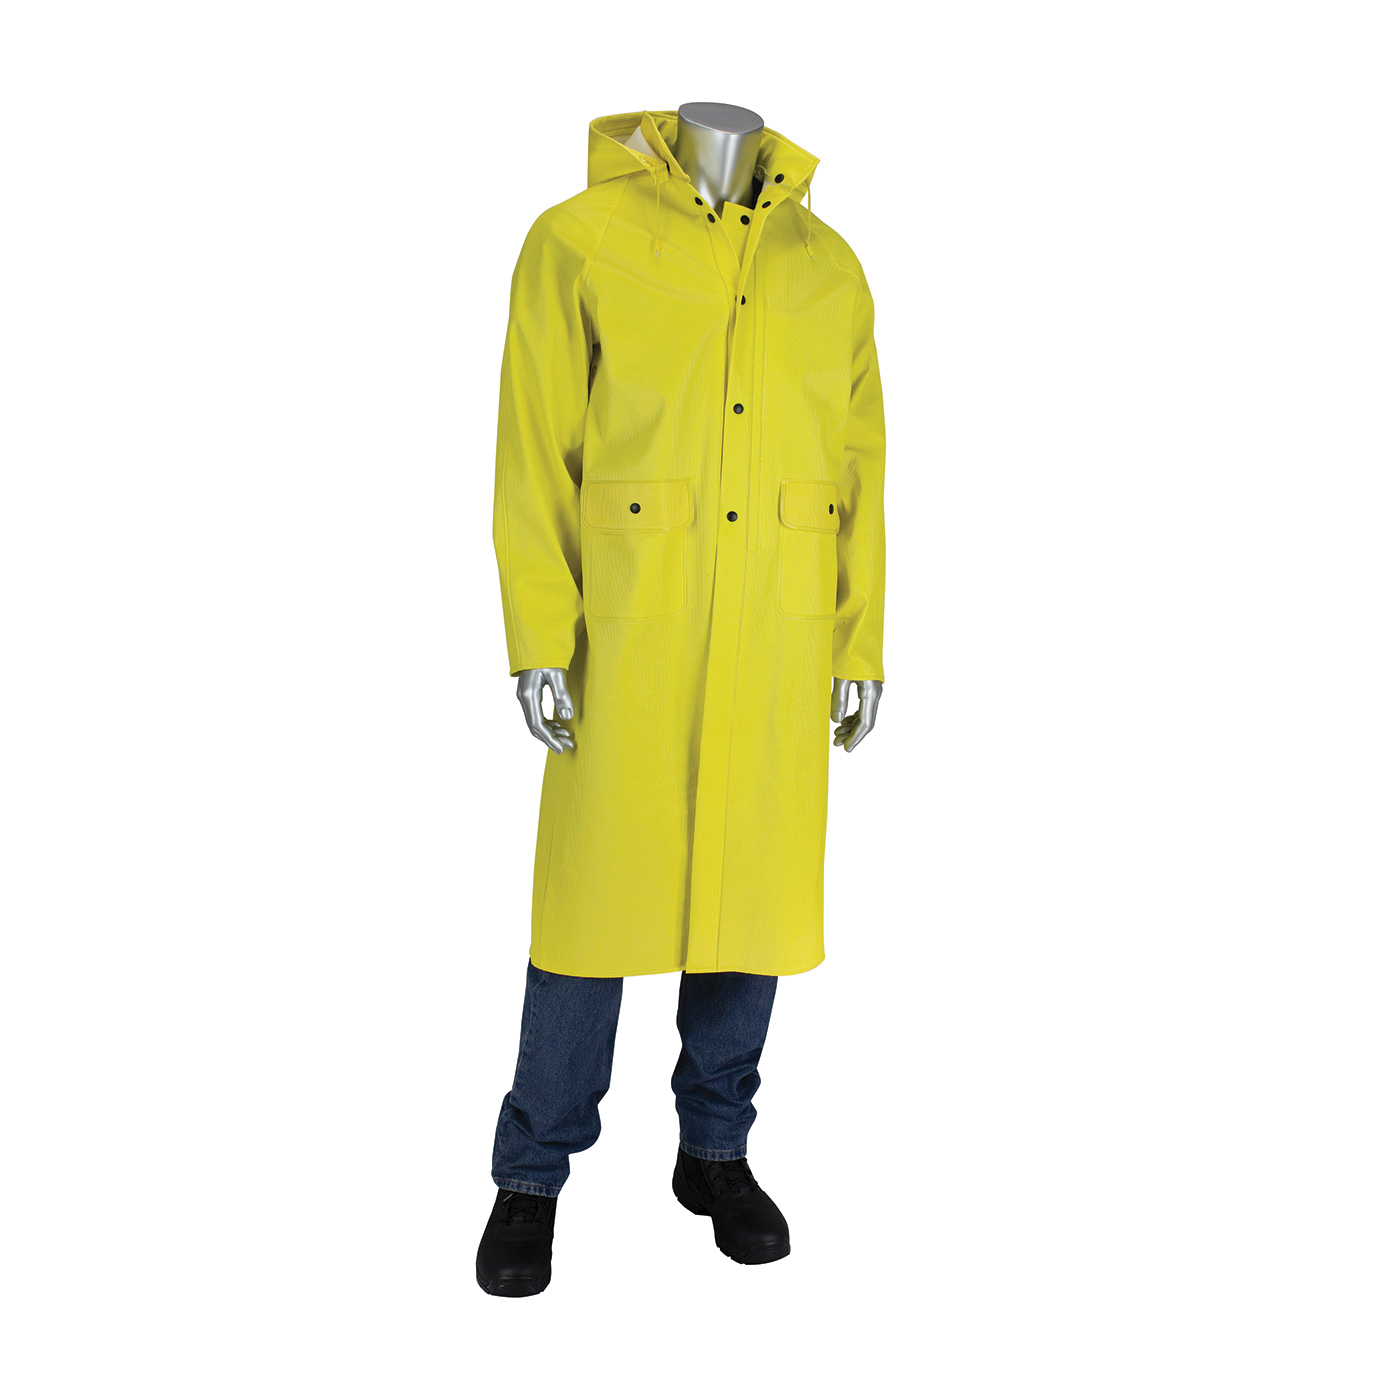 PIP® FALCON™ Flex™ 201-650C/3X 2-Piece Ribbed Rain Jacket With Hood, 3XL, Yellow, PVC/Non-Woven Polyester, Resists: Rips, Tear and Water